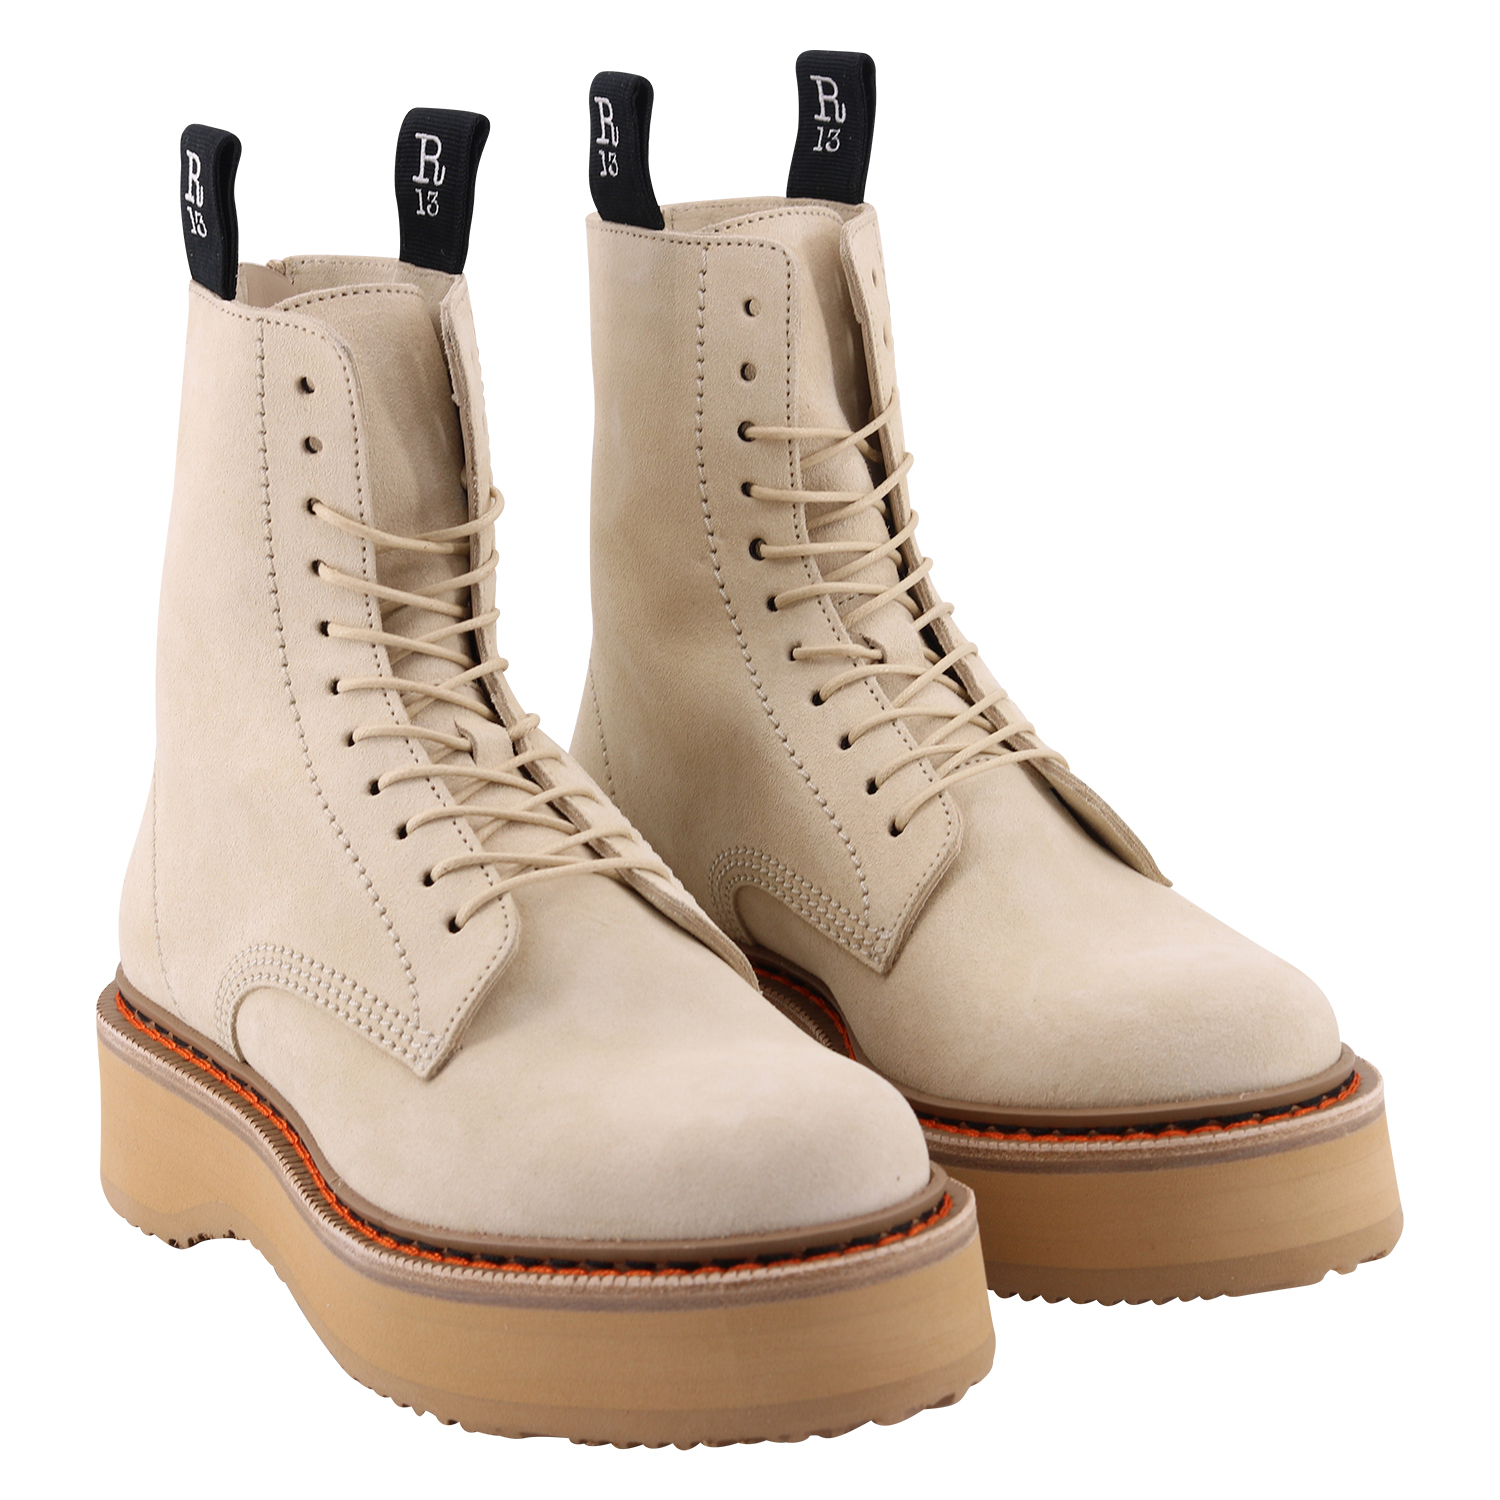 R13 Double Stack Suede Boots Tan